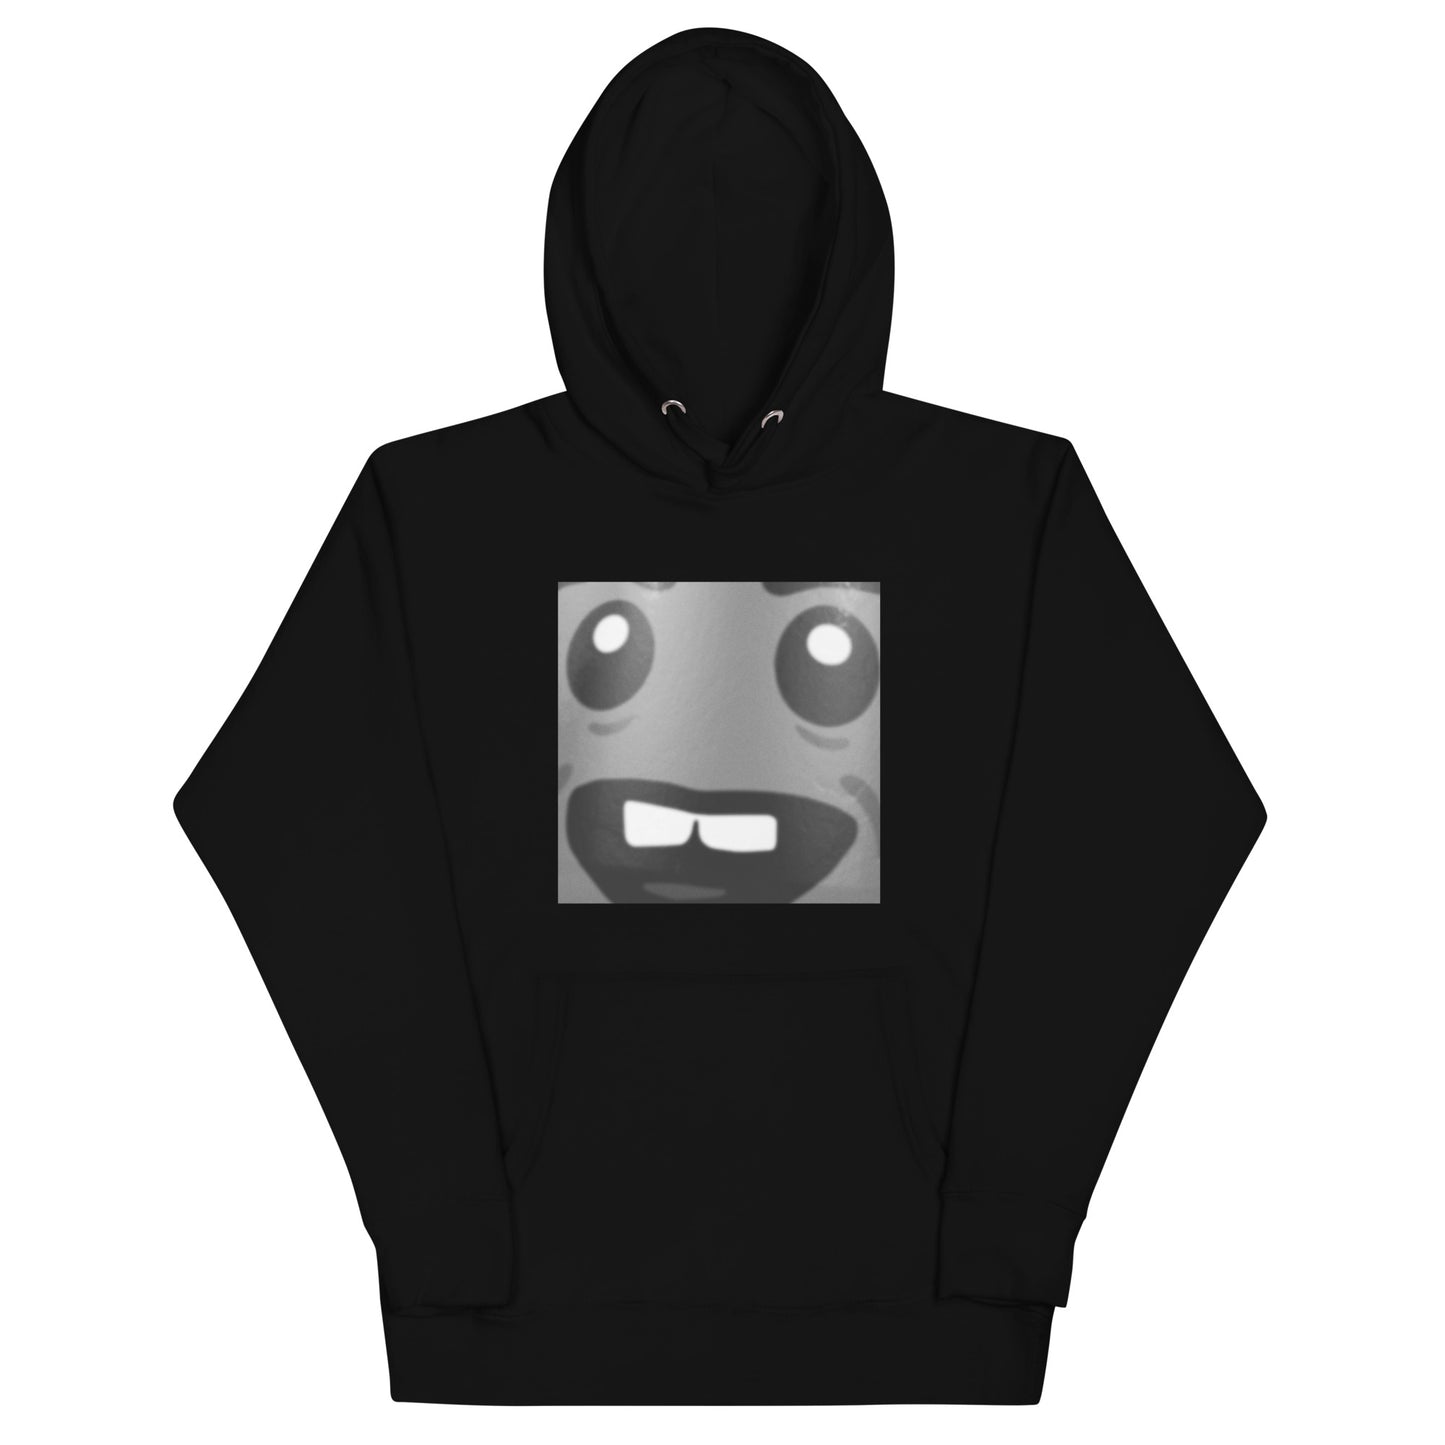 "Tyler, The Creator - Wolf (Alternate “Face” Cover)" Lego Parody Hoodie